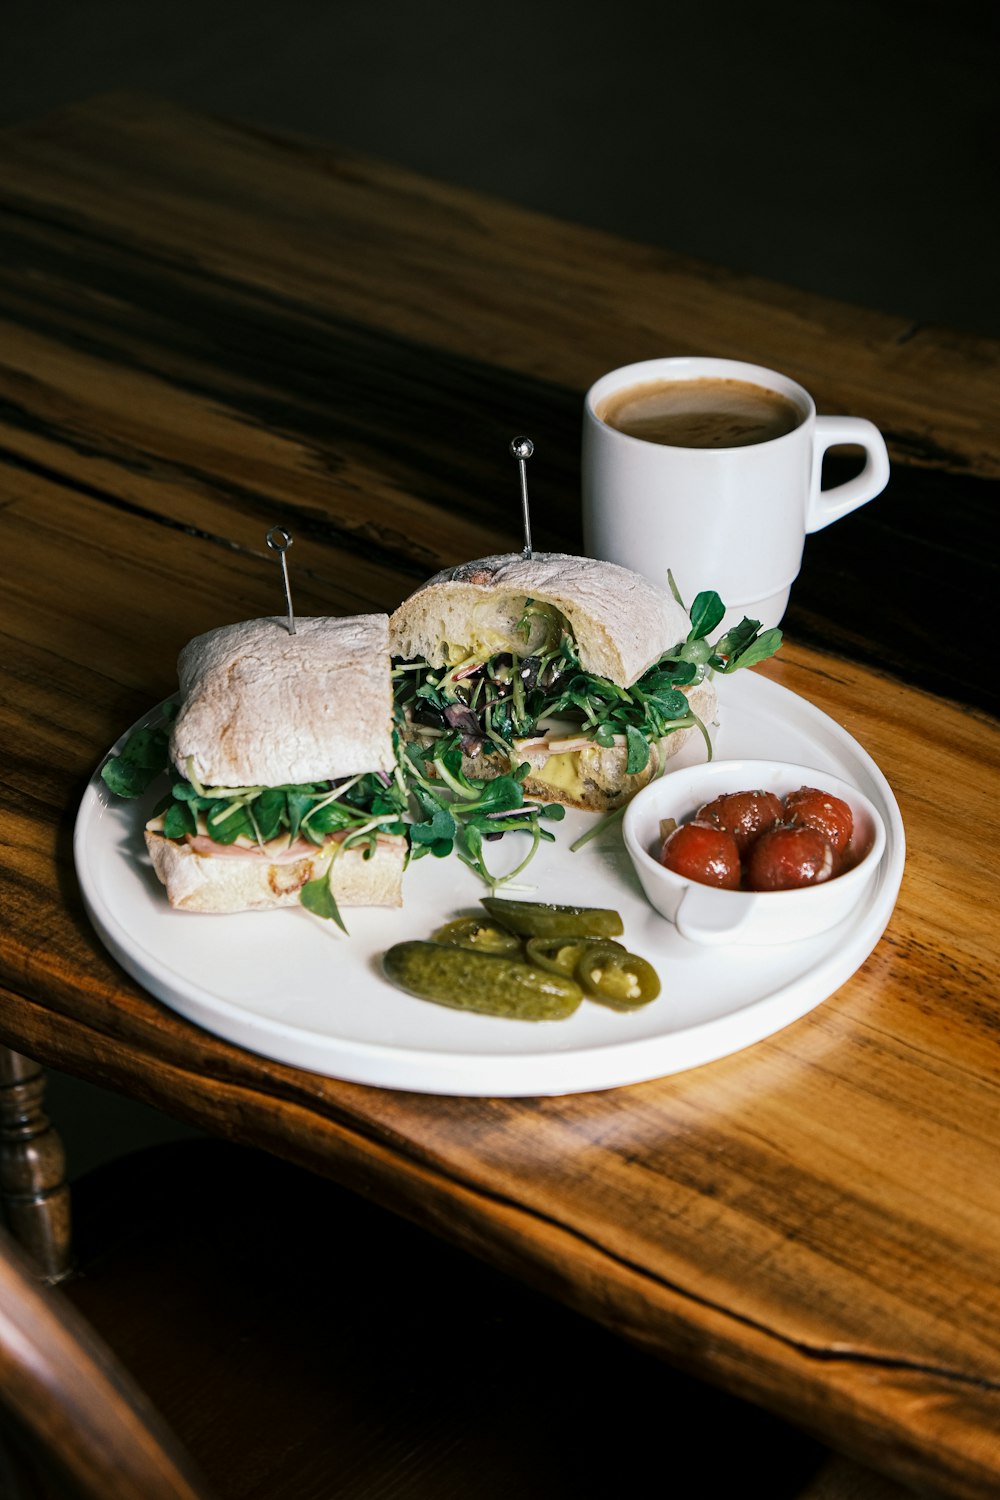 a white plate topped with a sandwich and a cup of coffee